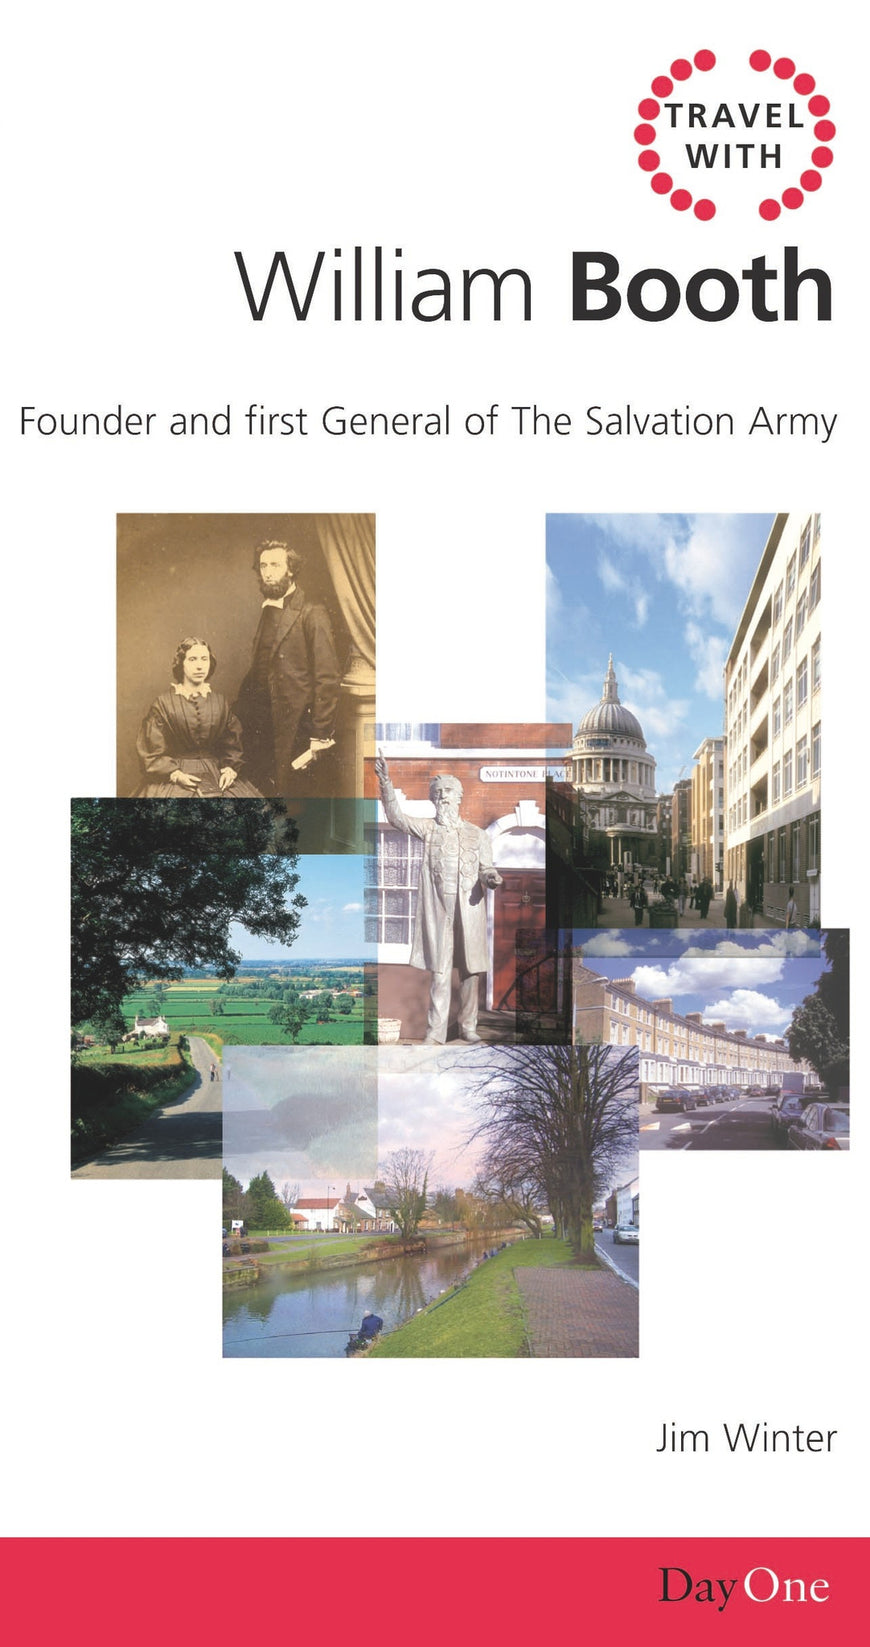 Travel with William Booth: Founder and First General of the Salvation Army (Day One Travel Guides)